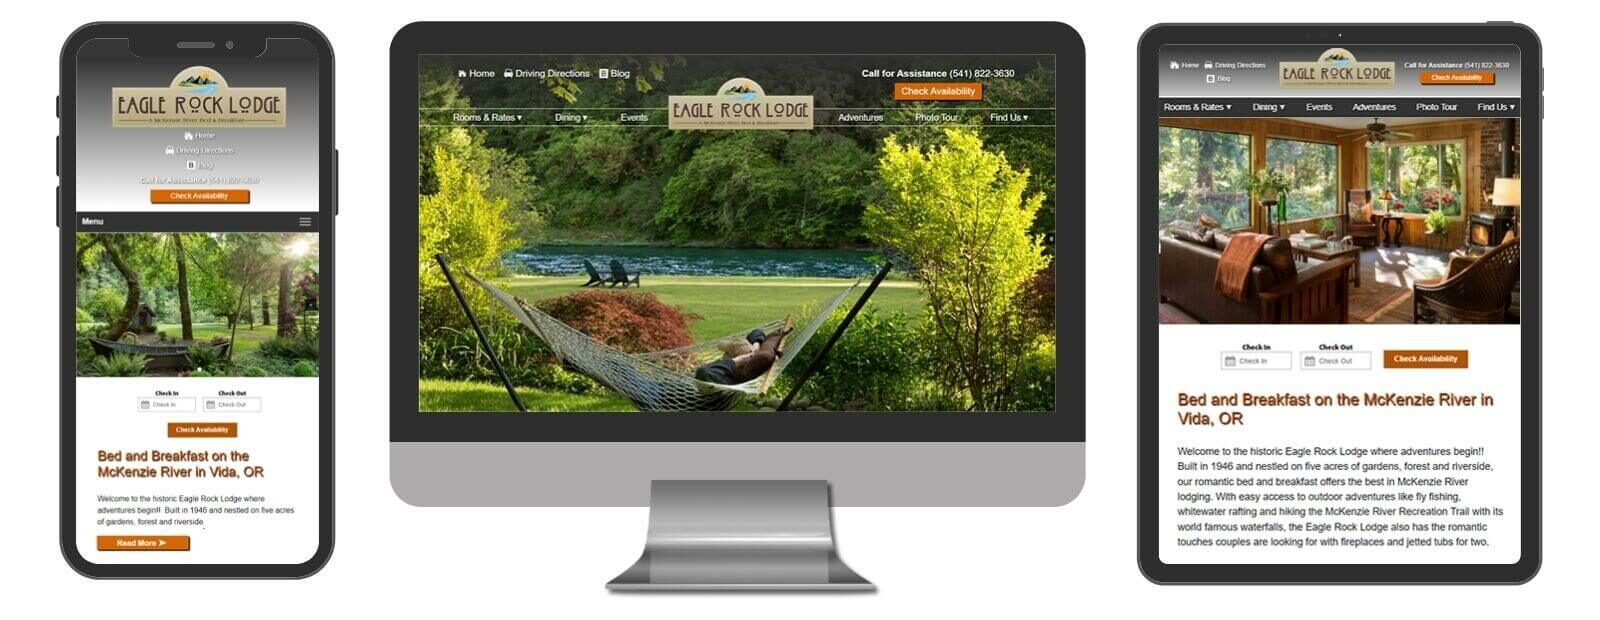 Eagle Rock Lodge website displayed in 3 sizes - mobile, template and desktop